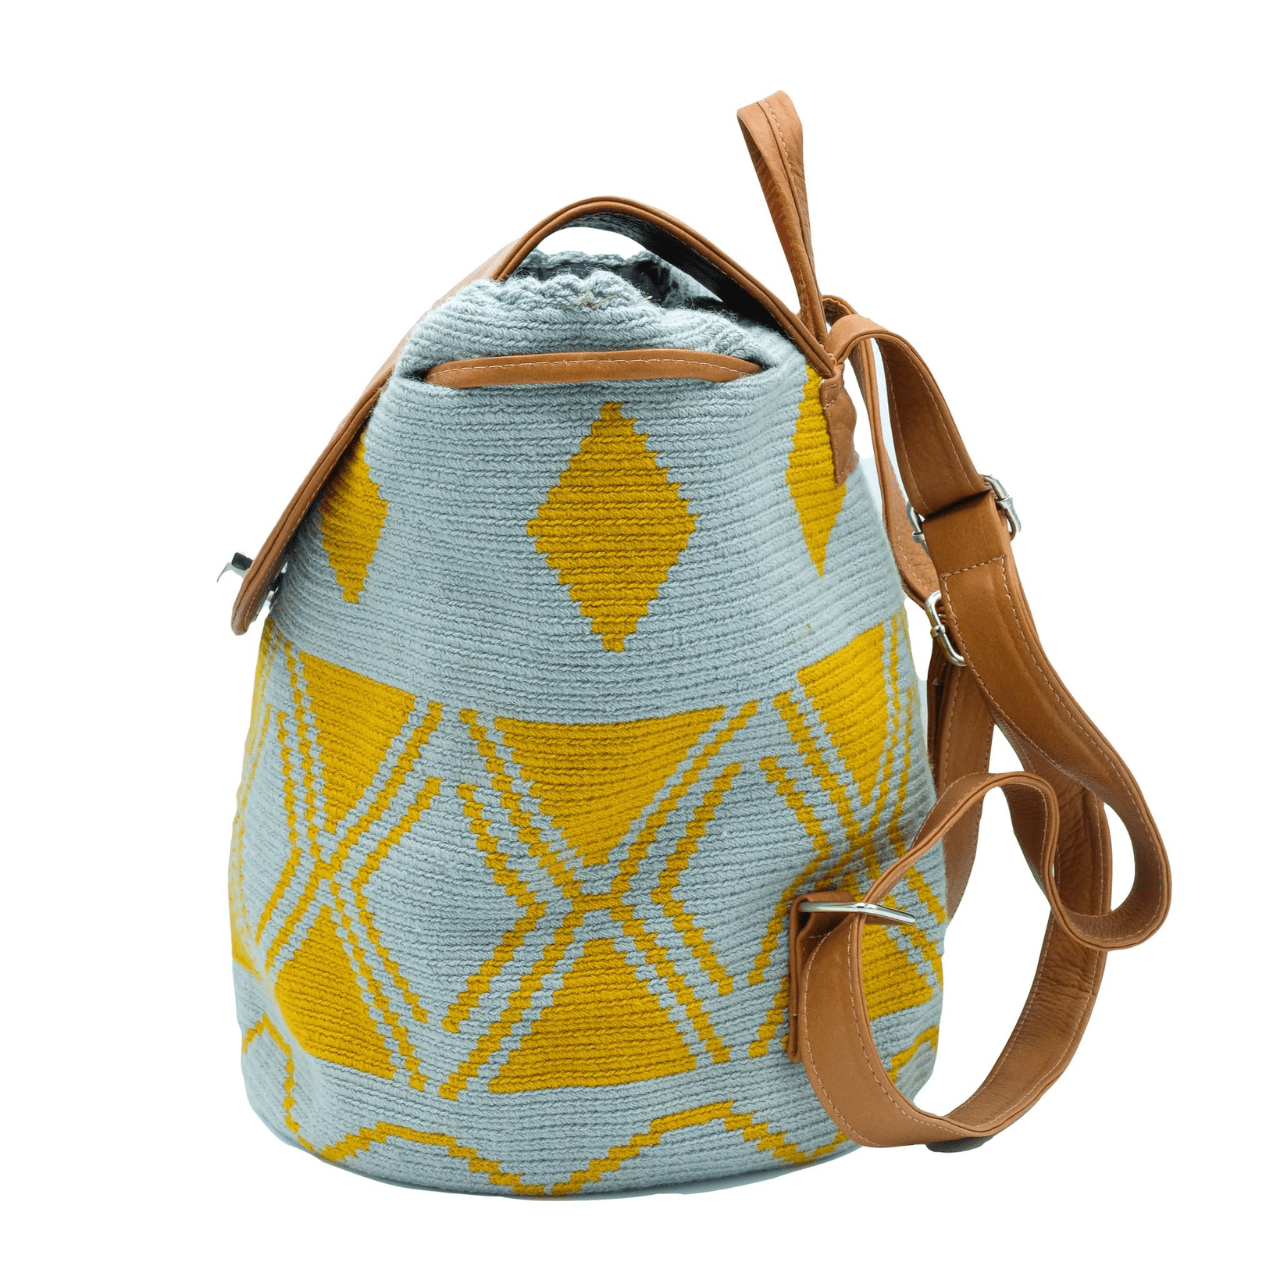 Taganga leather backpack featuring a stunning Wayuu pattern in a captivating blend of blue-gray and ochre colors. The design is accentuated with natural genuine leather, creating a beautiful contrast. This versatile bag is perfect for day outings or short trips, offering a lightweight and comfortable carrying experience.